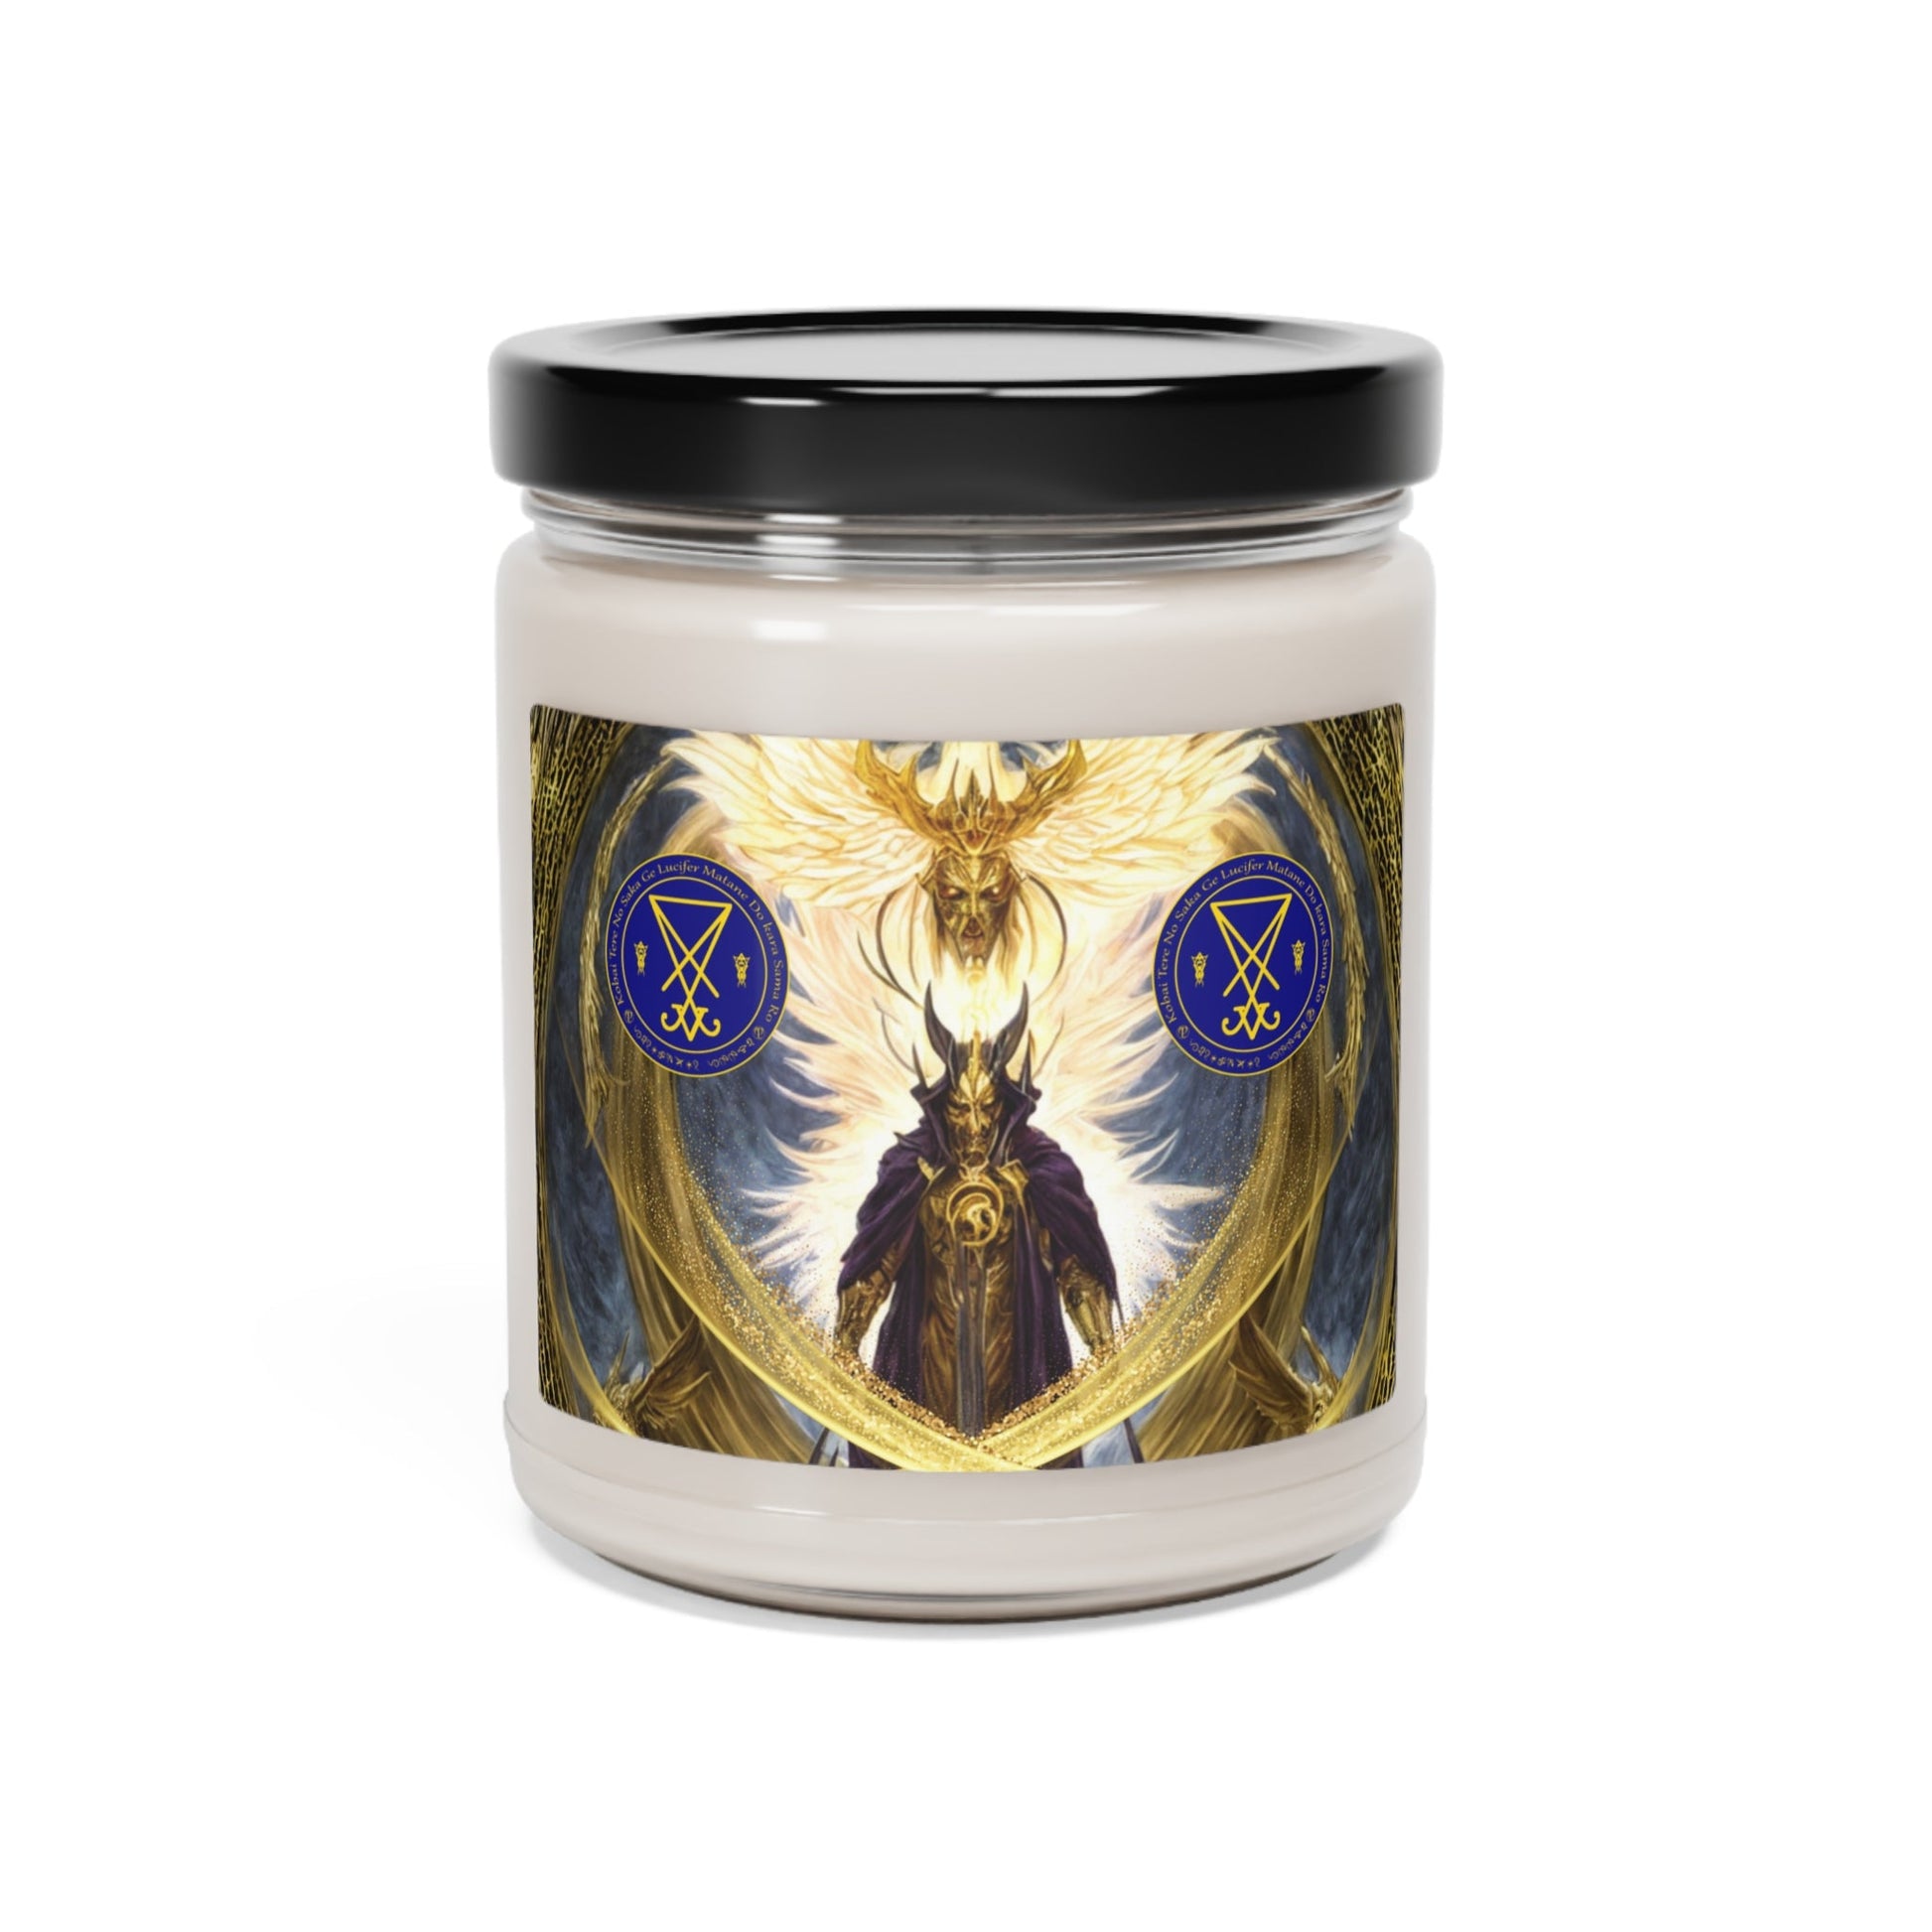 Demon-Lucifer-Scented-Soy-Candle-for-Altar-offerings-rituals-initiations-or-praying-and-meditation-21